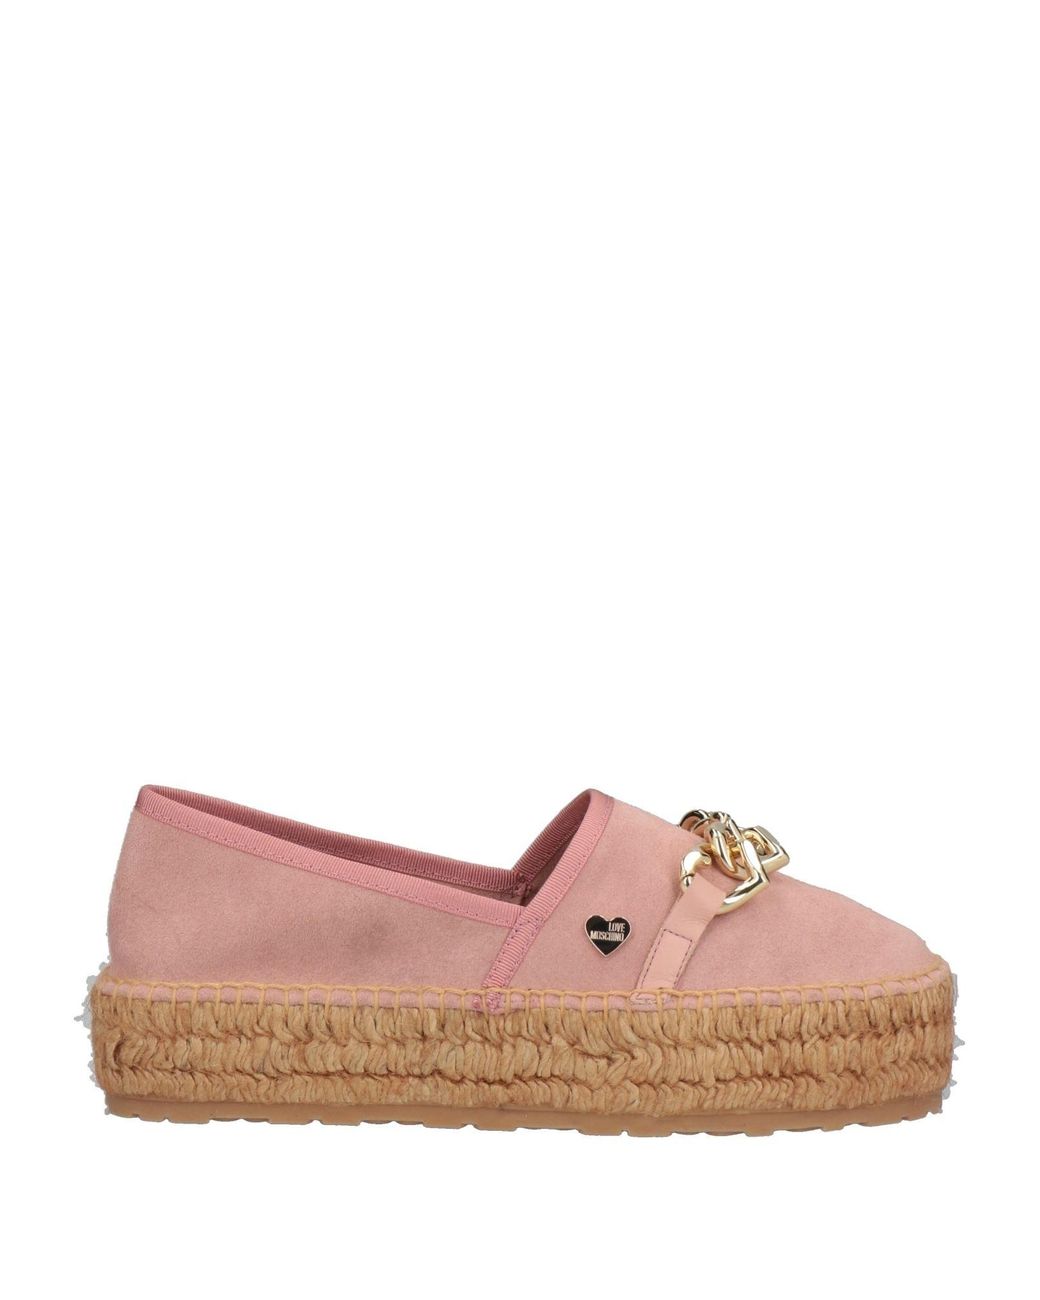 Love Moschino Espadrilles in Pink | Lyst